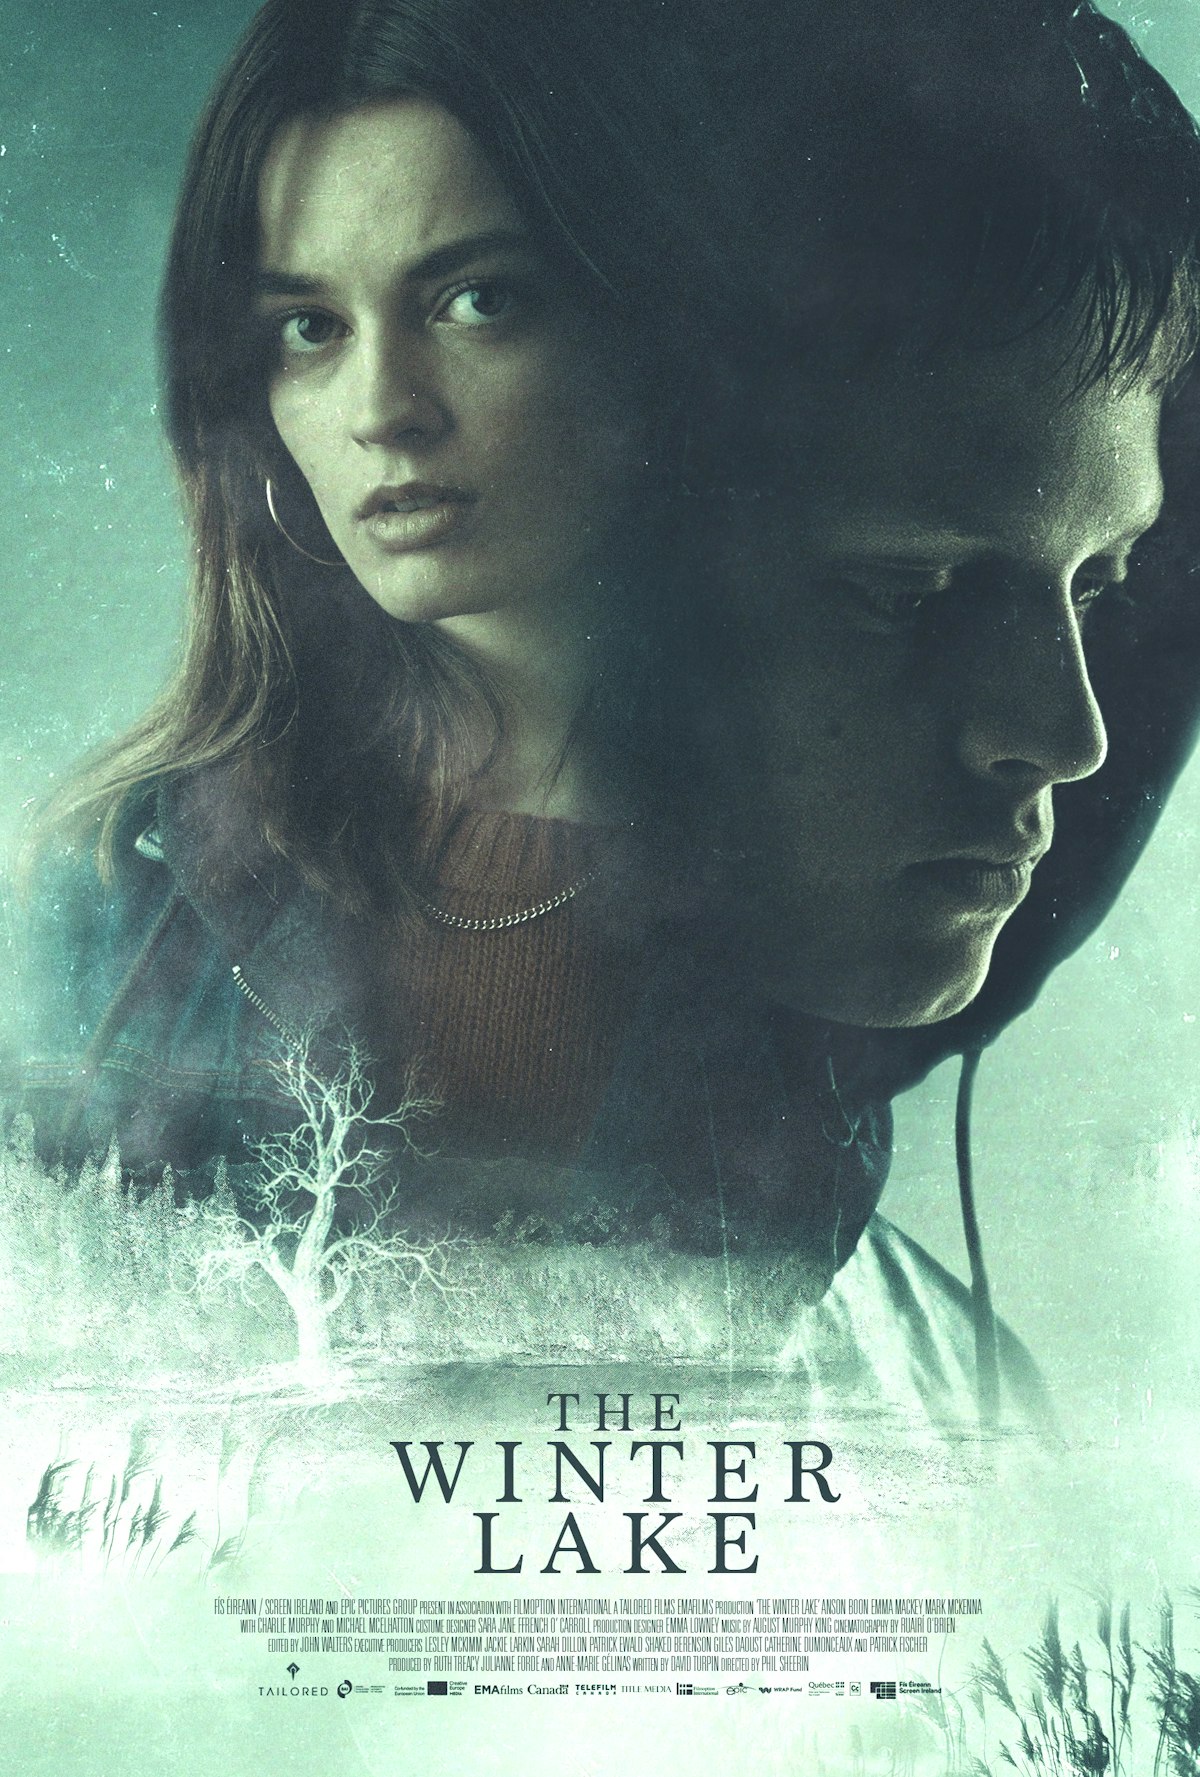 THE WINTER LAKE TO PREMIERE AT GAWAY FILM FLEADH.